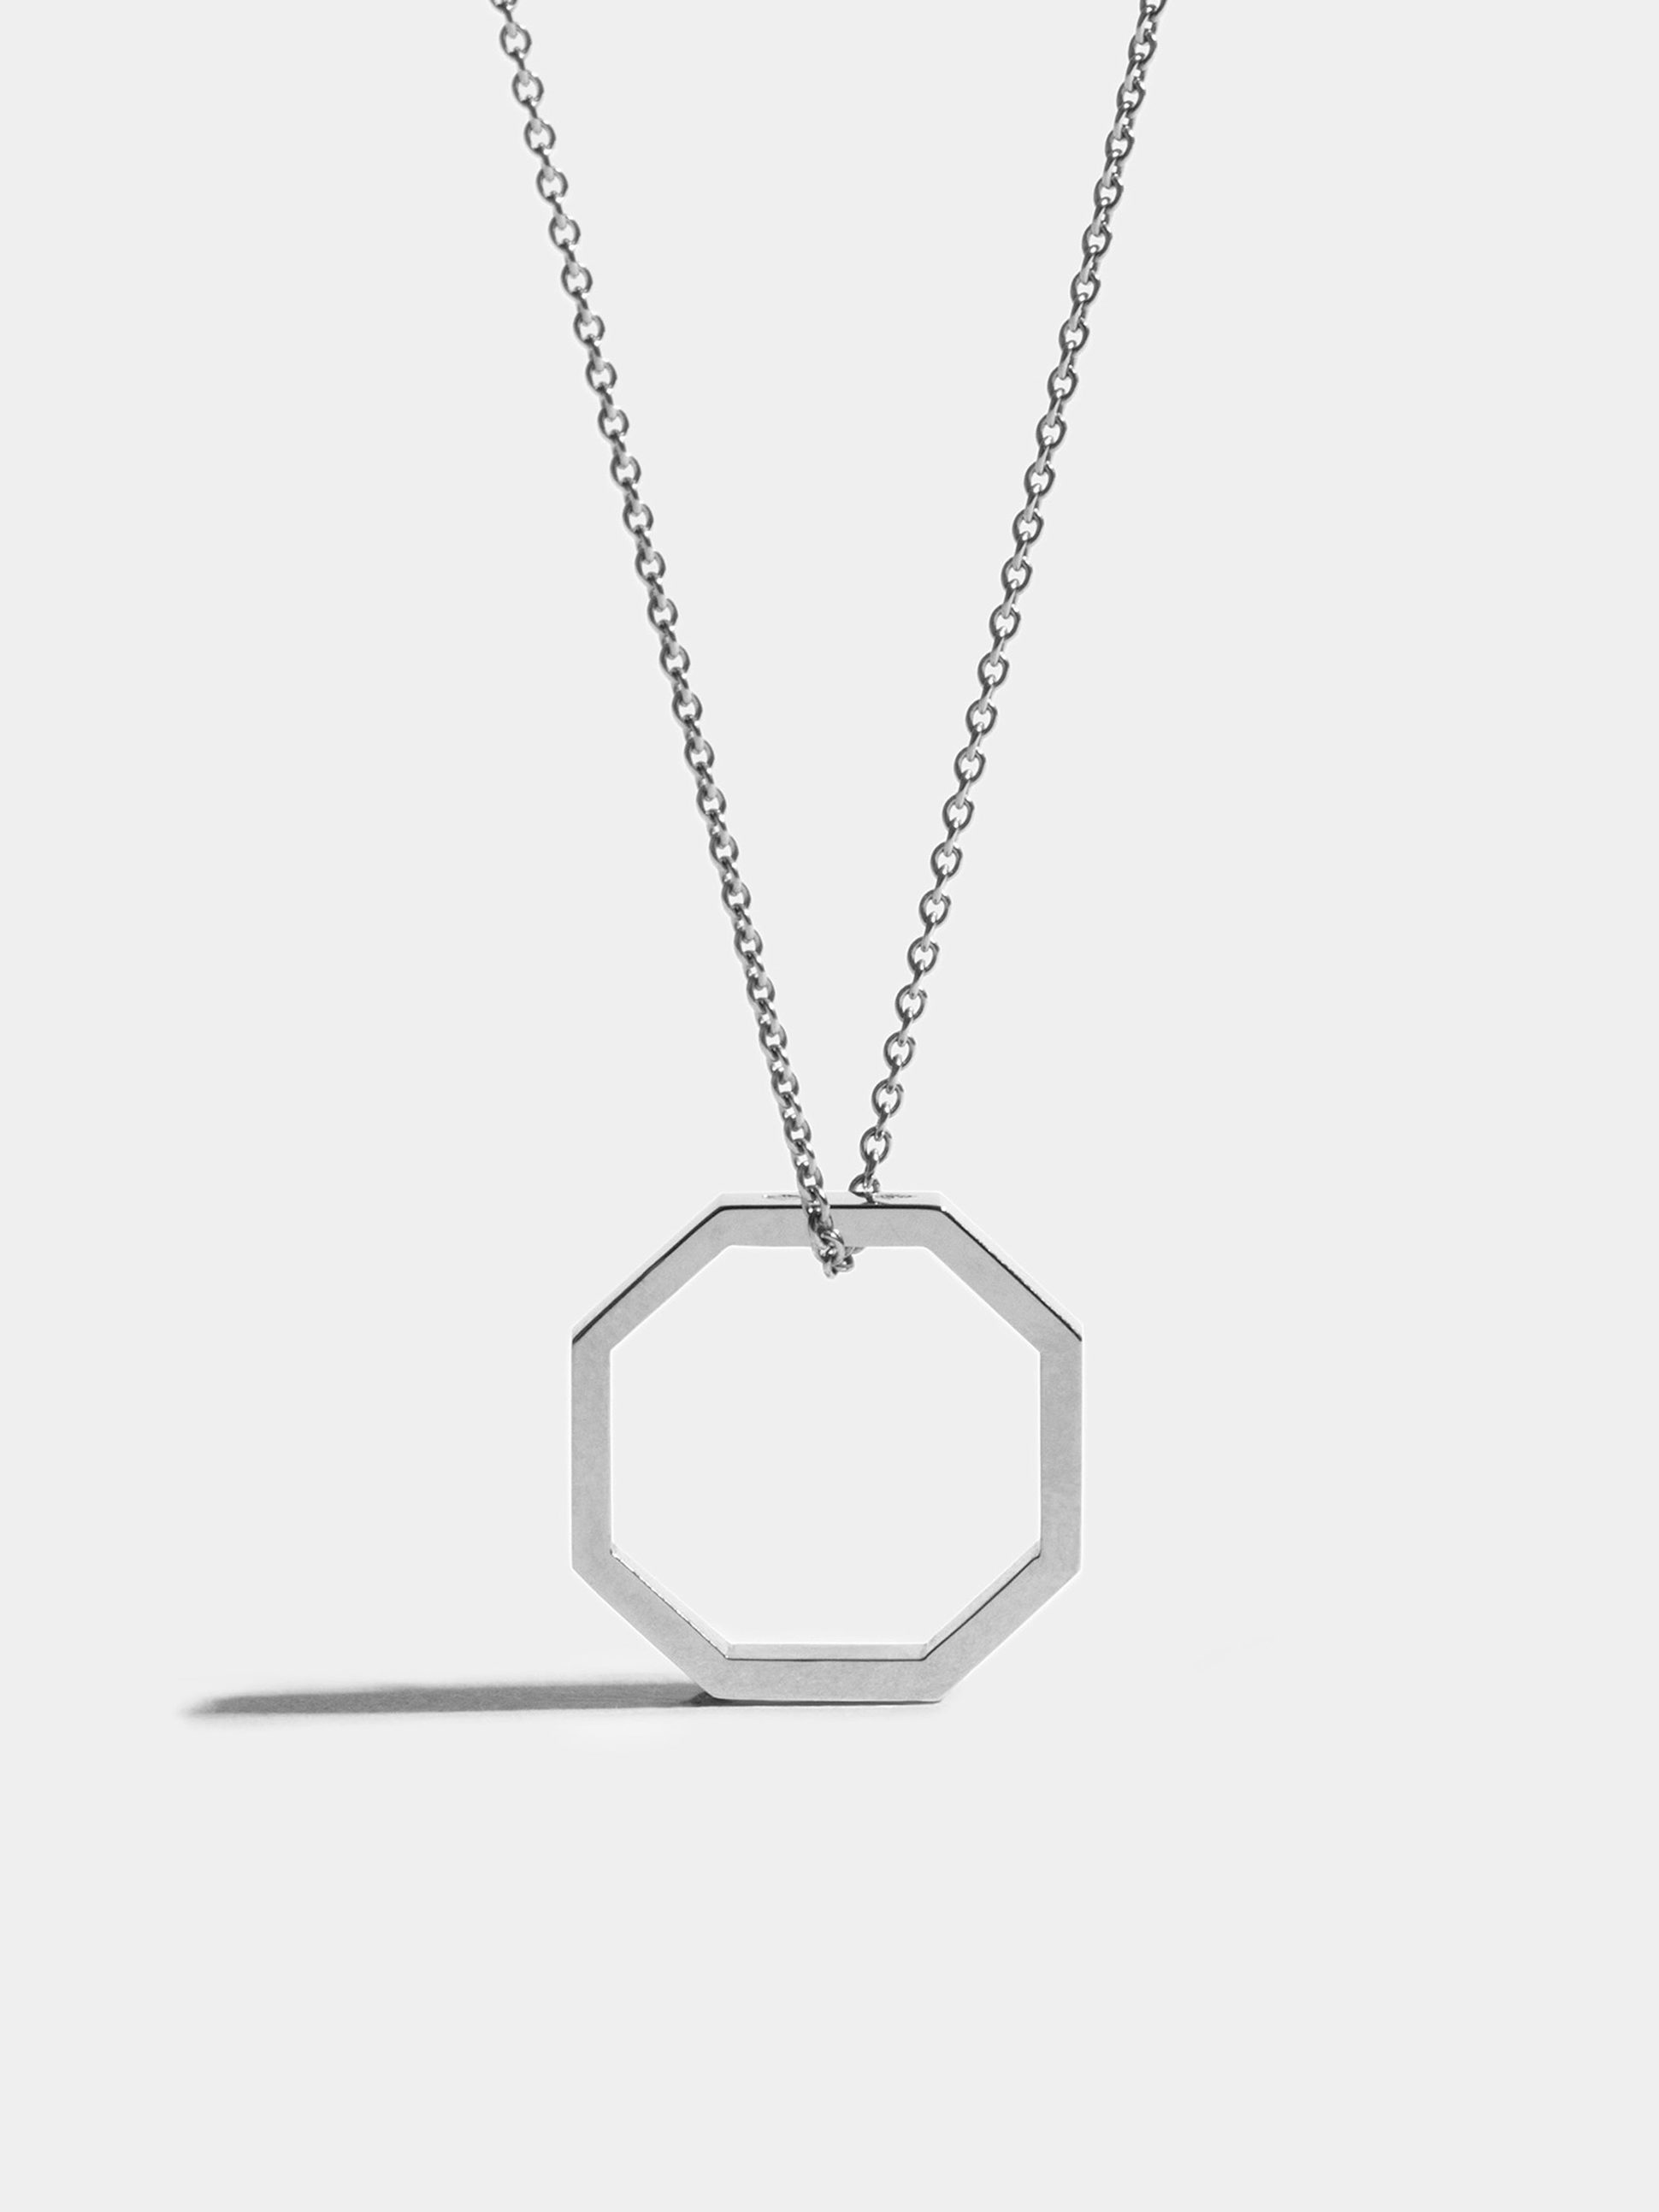 Octogone necklace with a 18mm pendant in 18k Fairmined ethical white gold, on a 88cm chain.